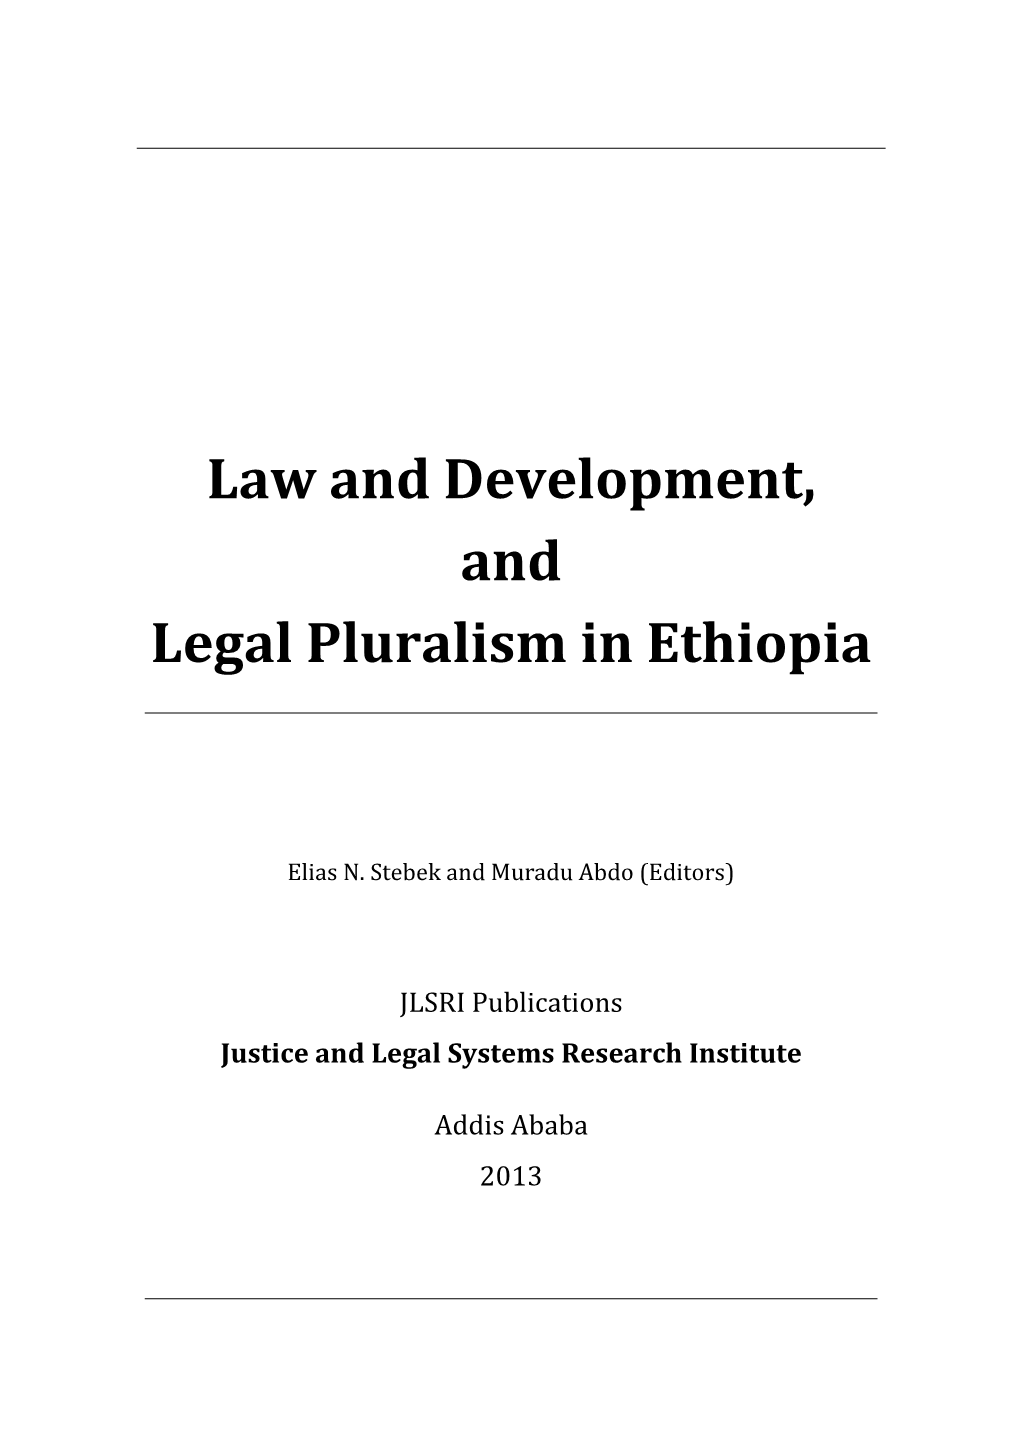 Law and Development, and Legal Pluralism in Ethiopia